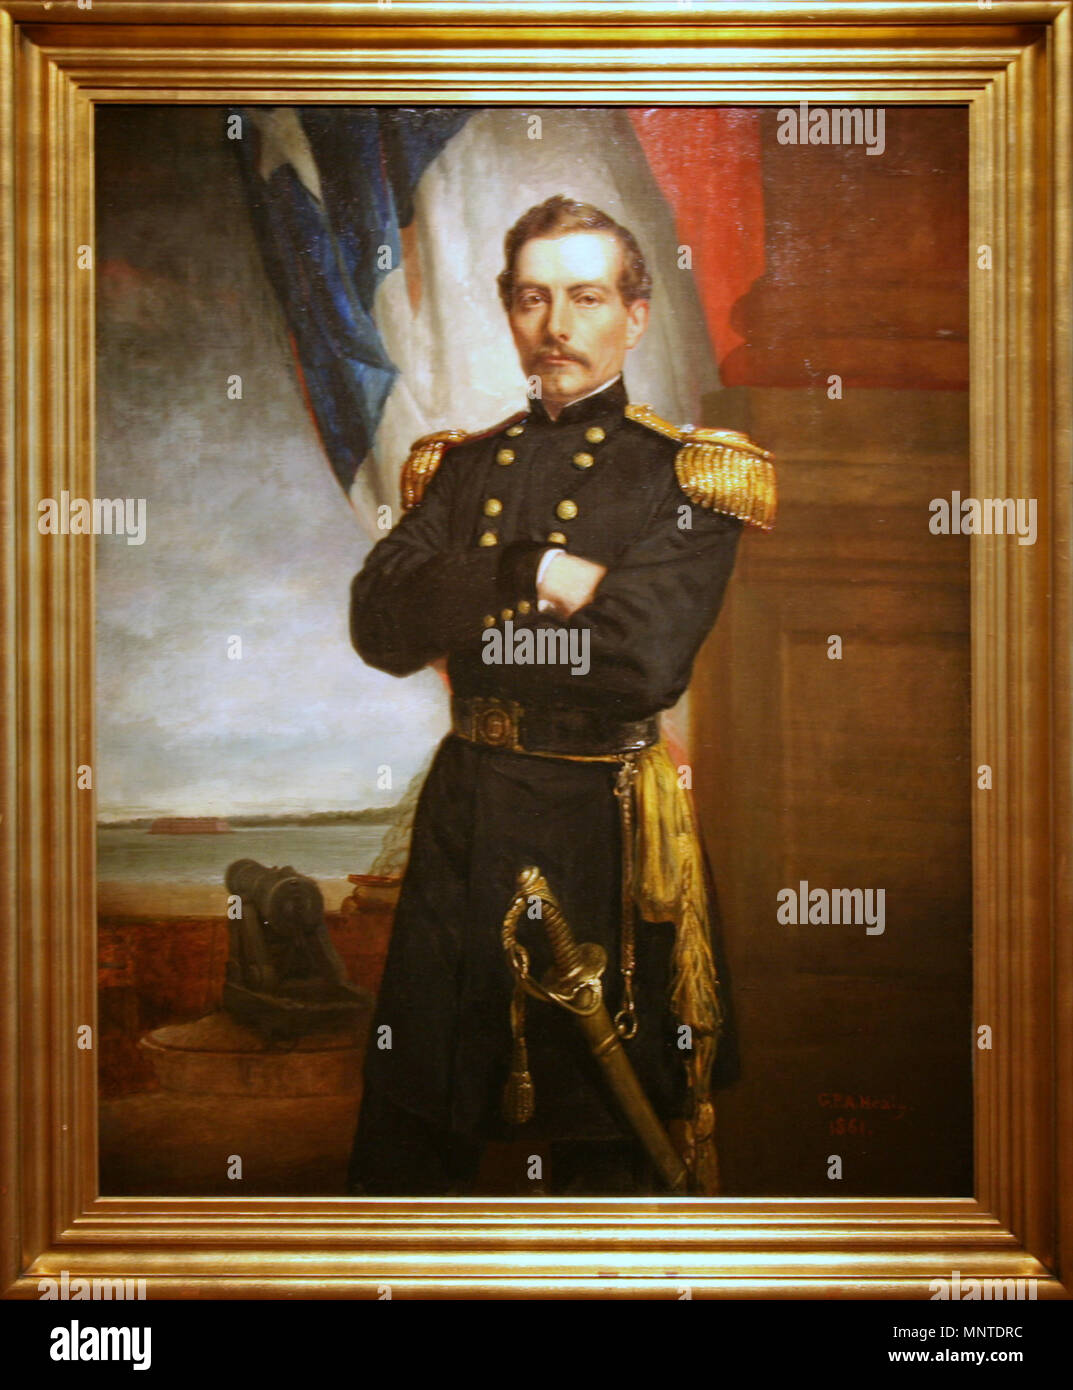 Pierre Gustave Toutant Beauregard . Portrait of General Beauregard in uniform, his arms folded across his chest, standing at Fort Moultrie in front of the flag of the Confederate States. In the background is the cannon from which the first shot was fired at the 'Star of the West.' . 1861.   987 Pierre G.T. Beauregard by Healy Stock Photo